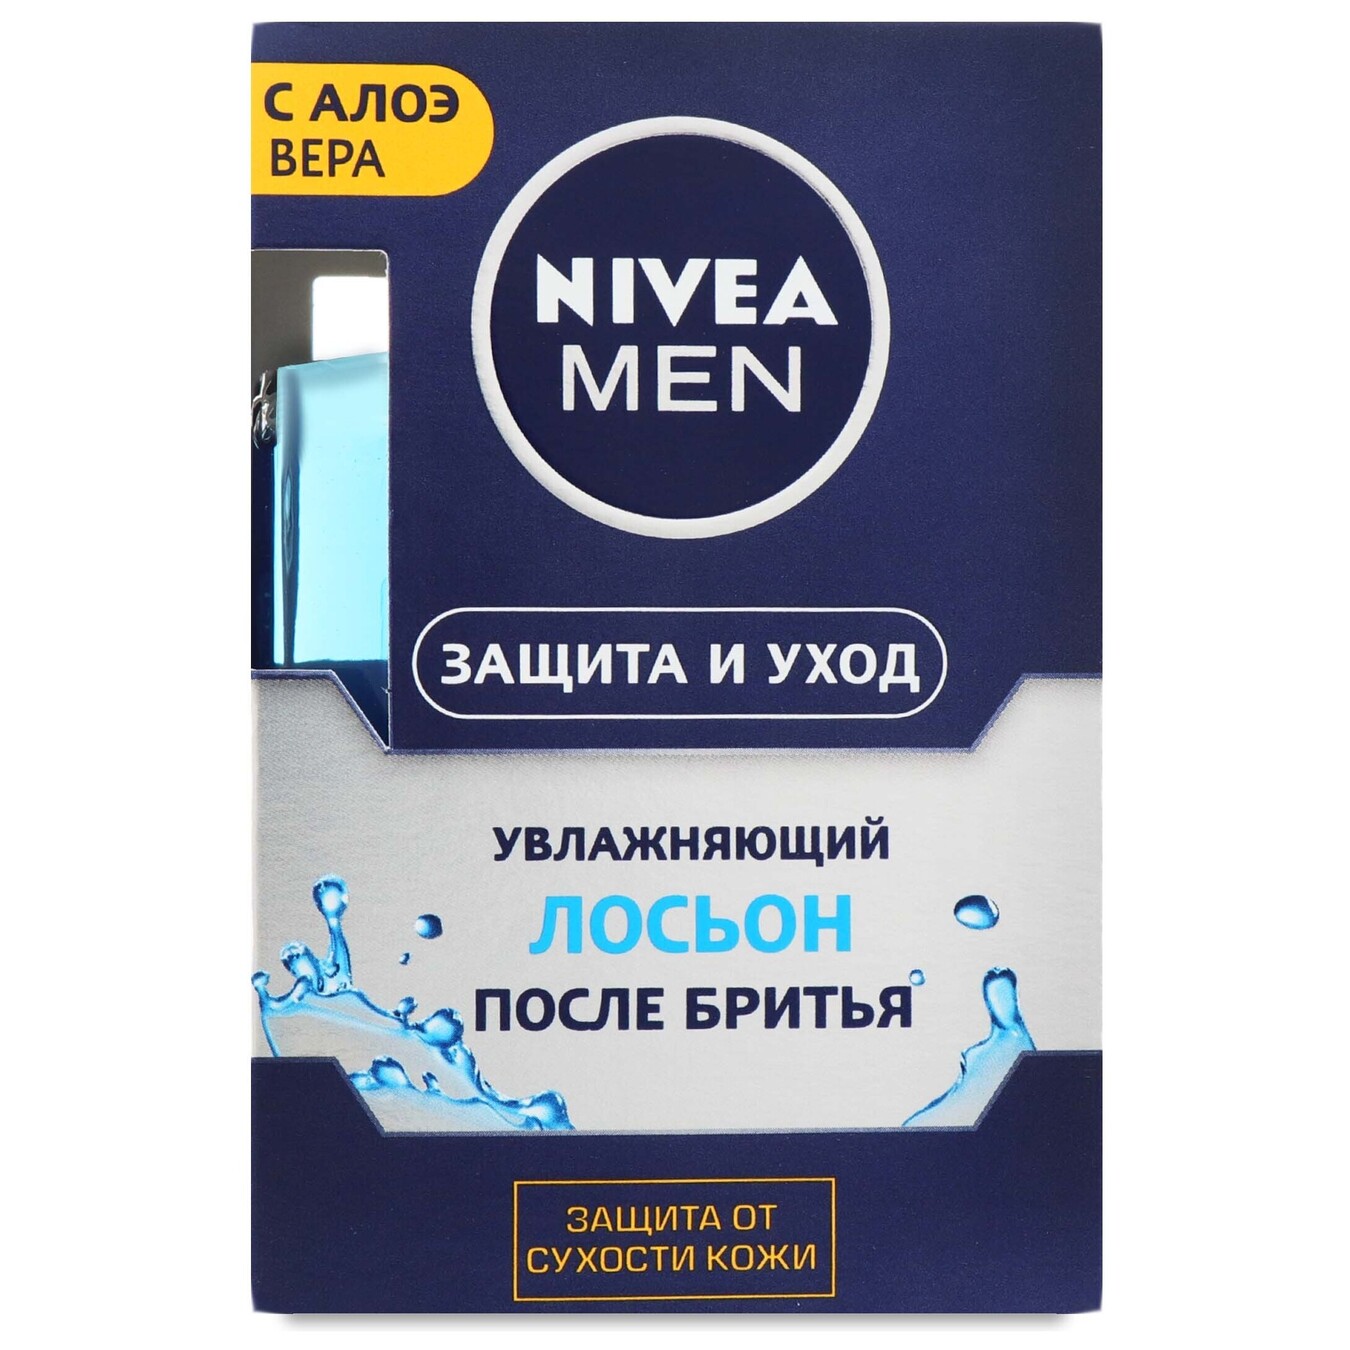 Moisturizing lotion after shaving Nivea Protection and care 100 ml